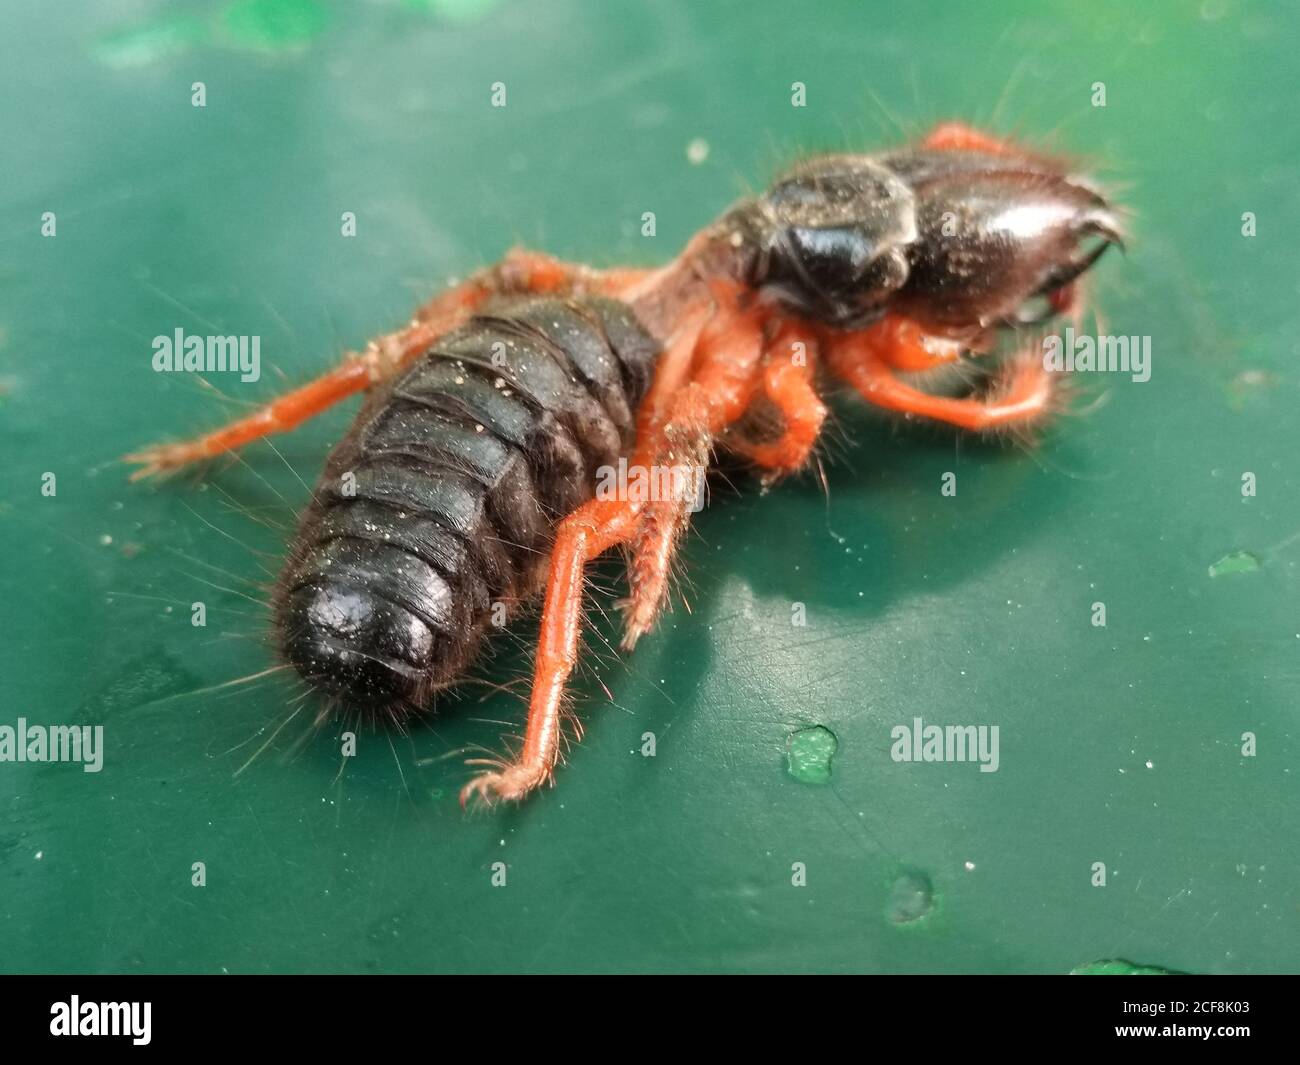 A picture of black ant with blur background Stock Photo